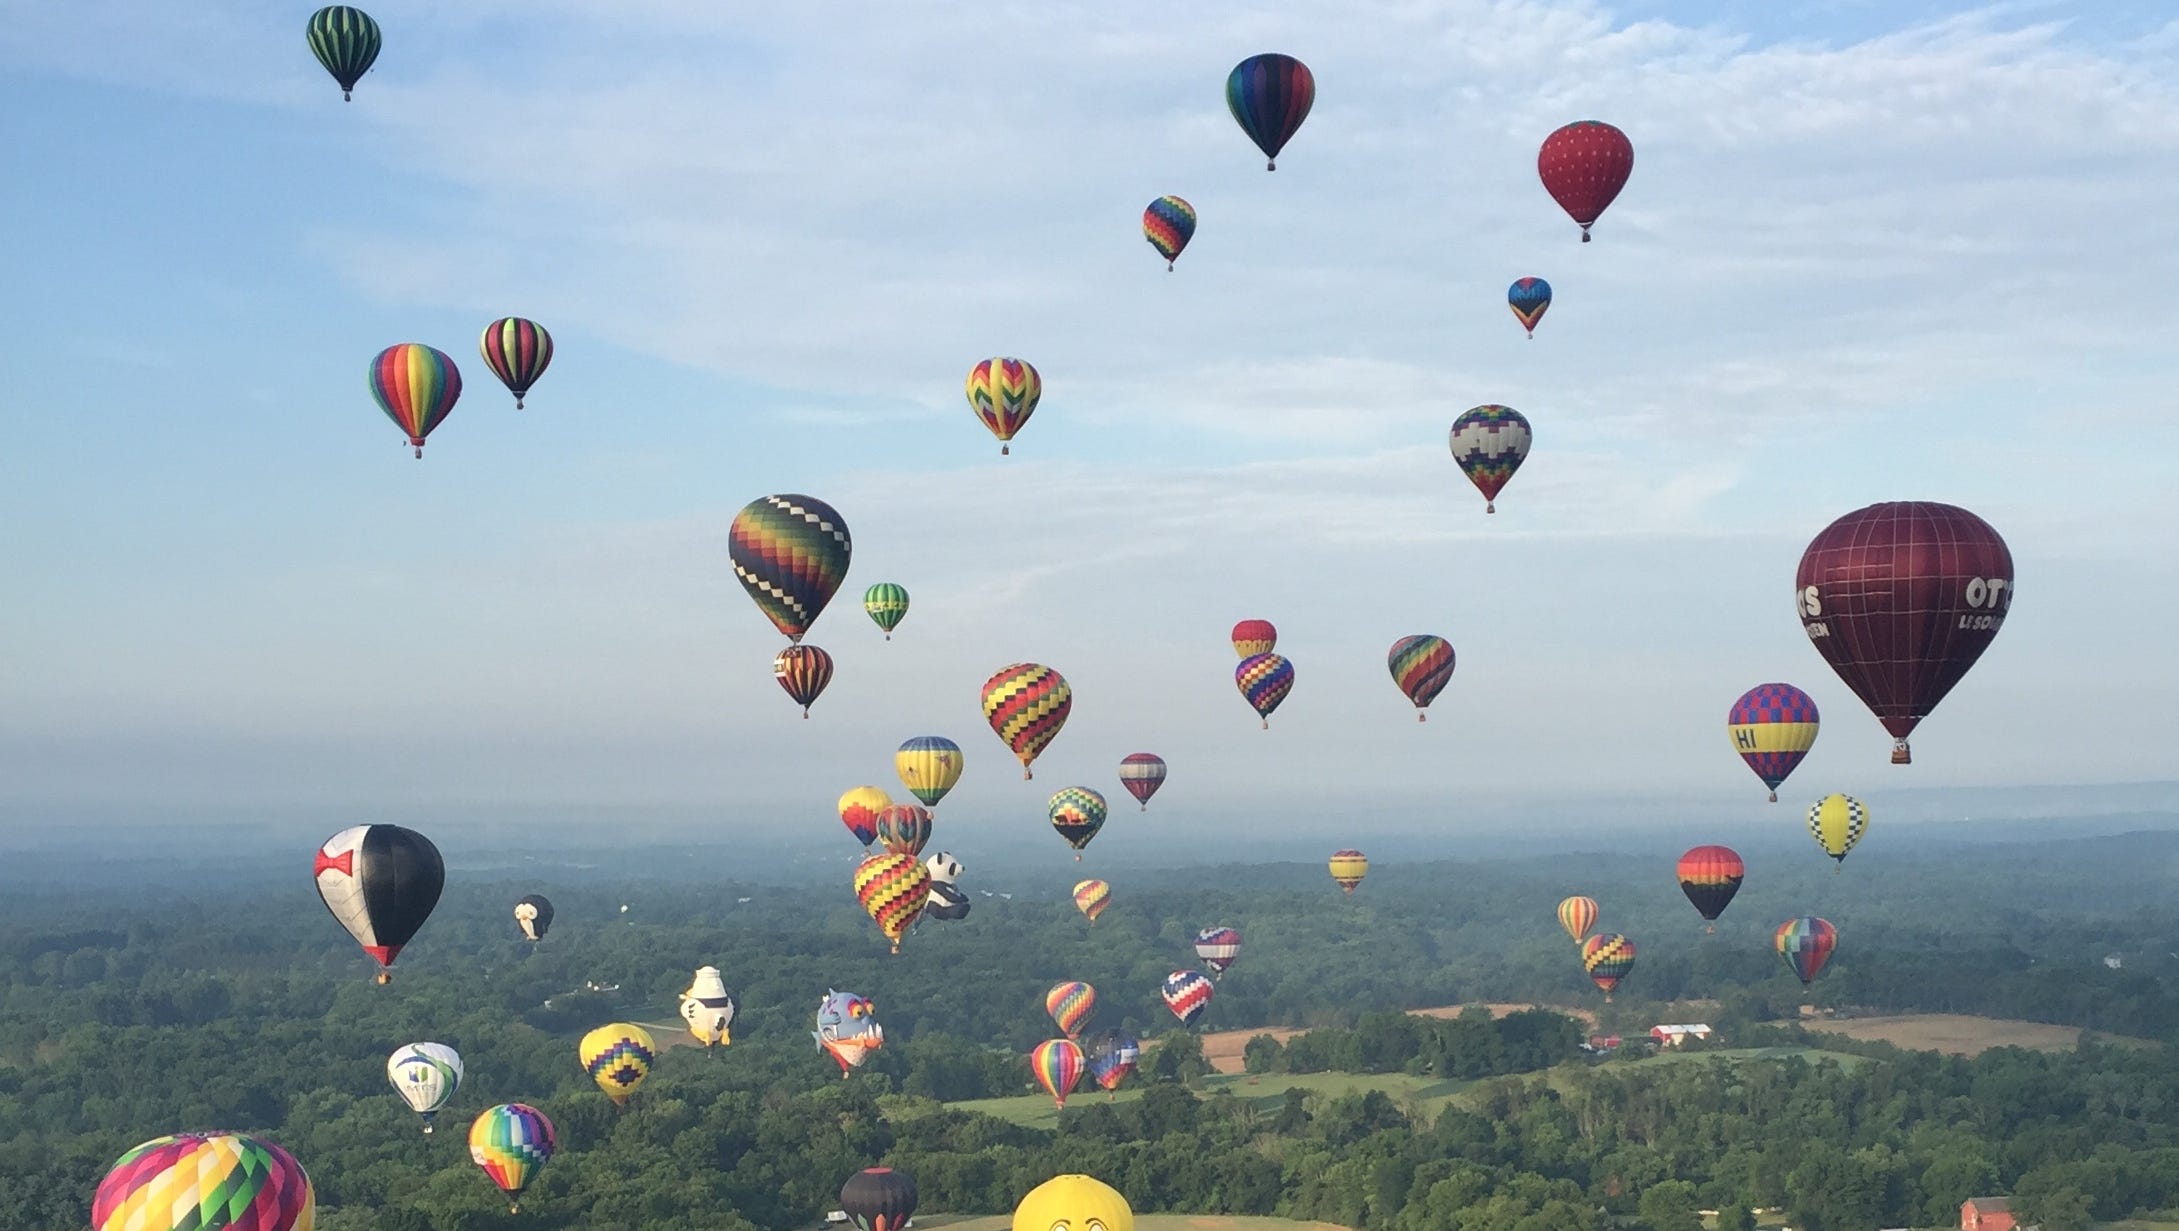 New Jersey balloon festival is back July 23 to 25 in Readington